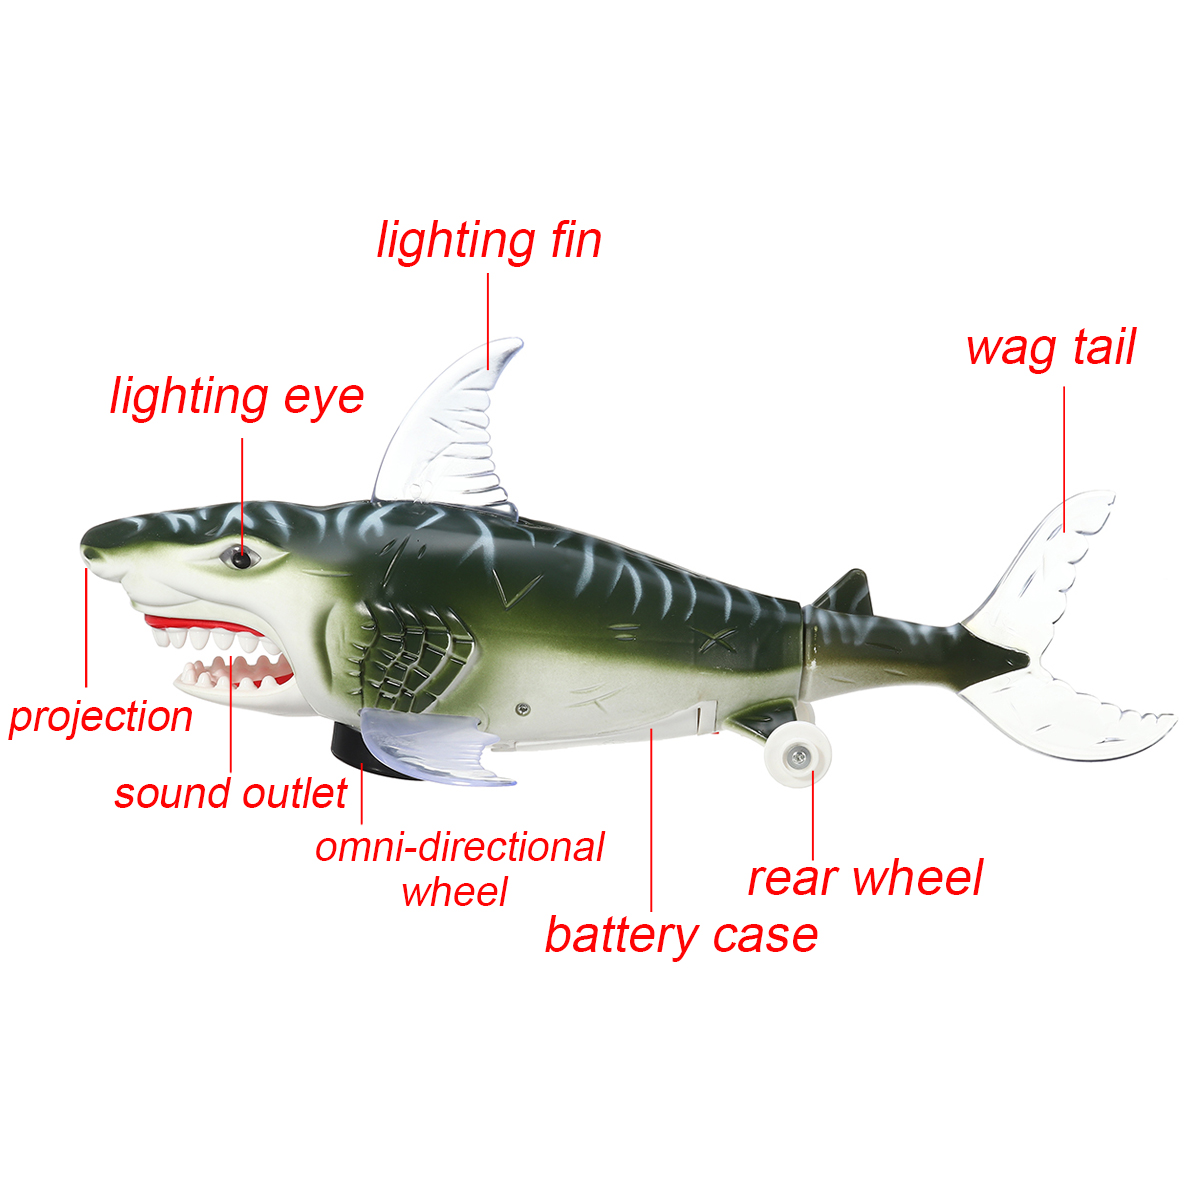 Electric-Projection-Light-Sound-Shark-Walking-Animal-Educational-Toys-for-Kids-Gift-1678213-10